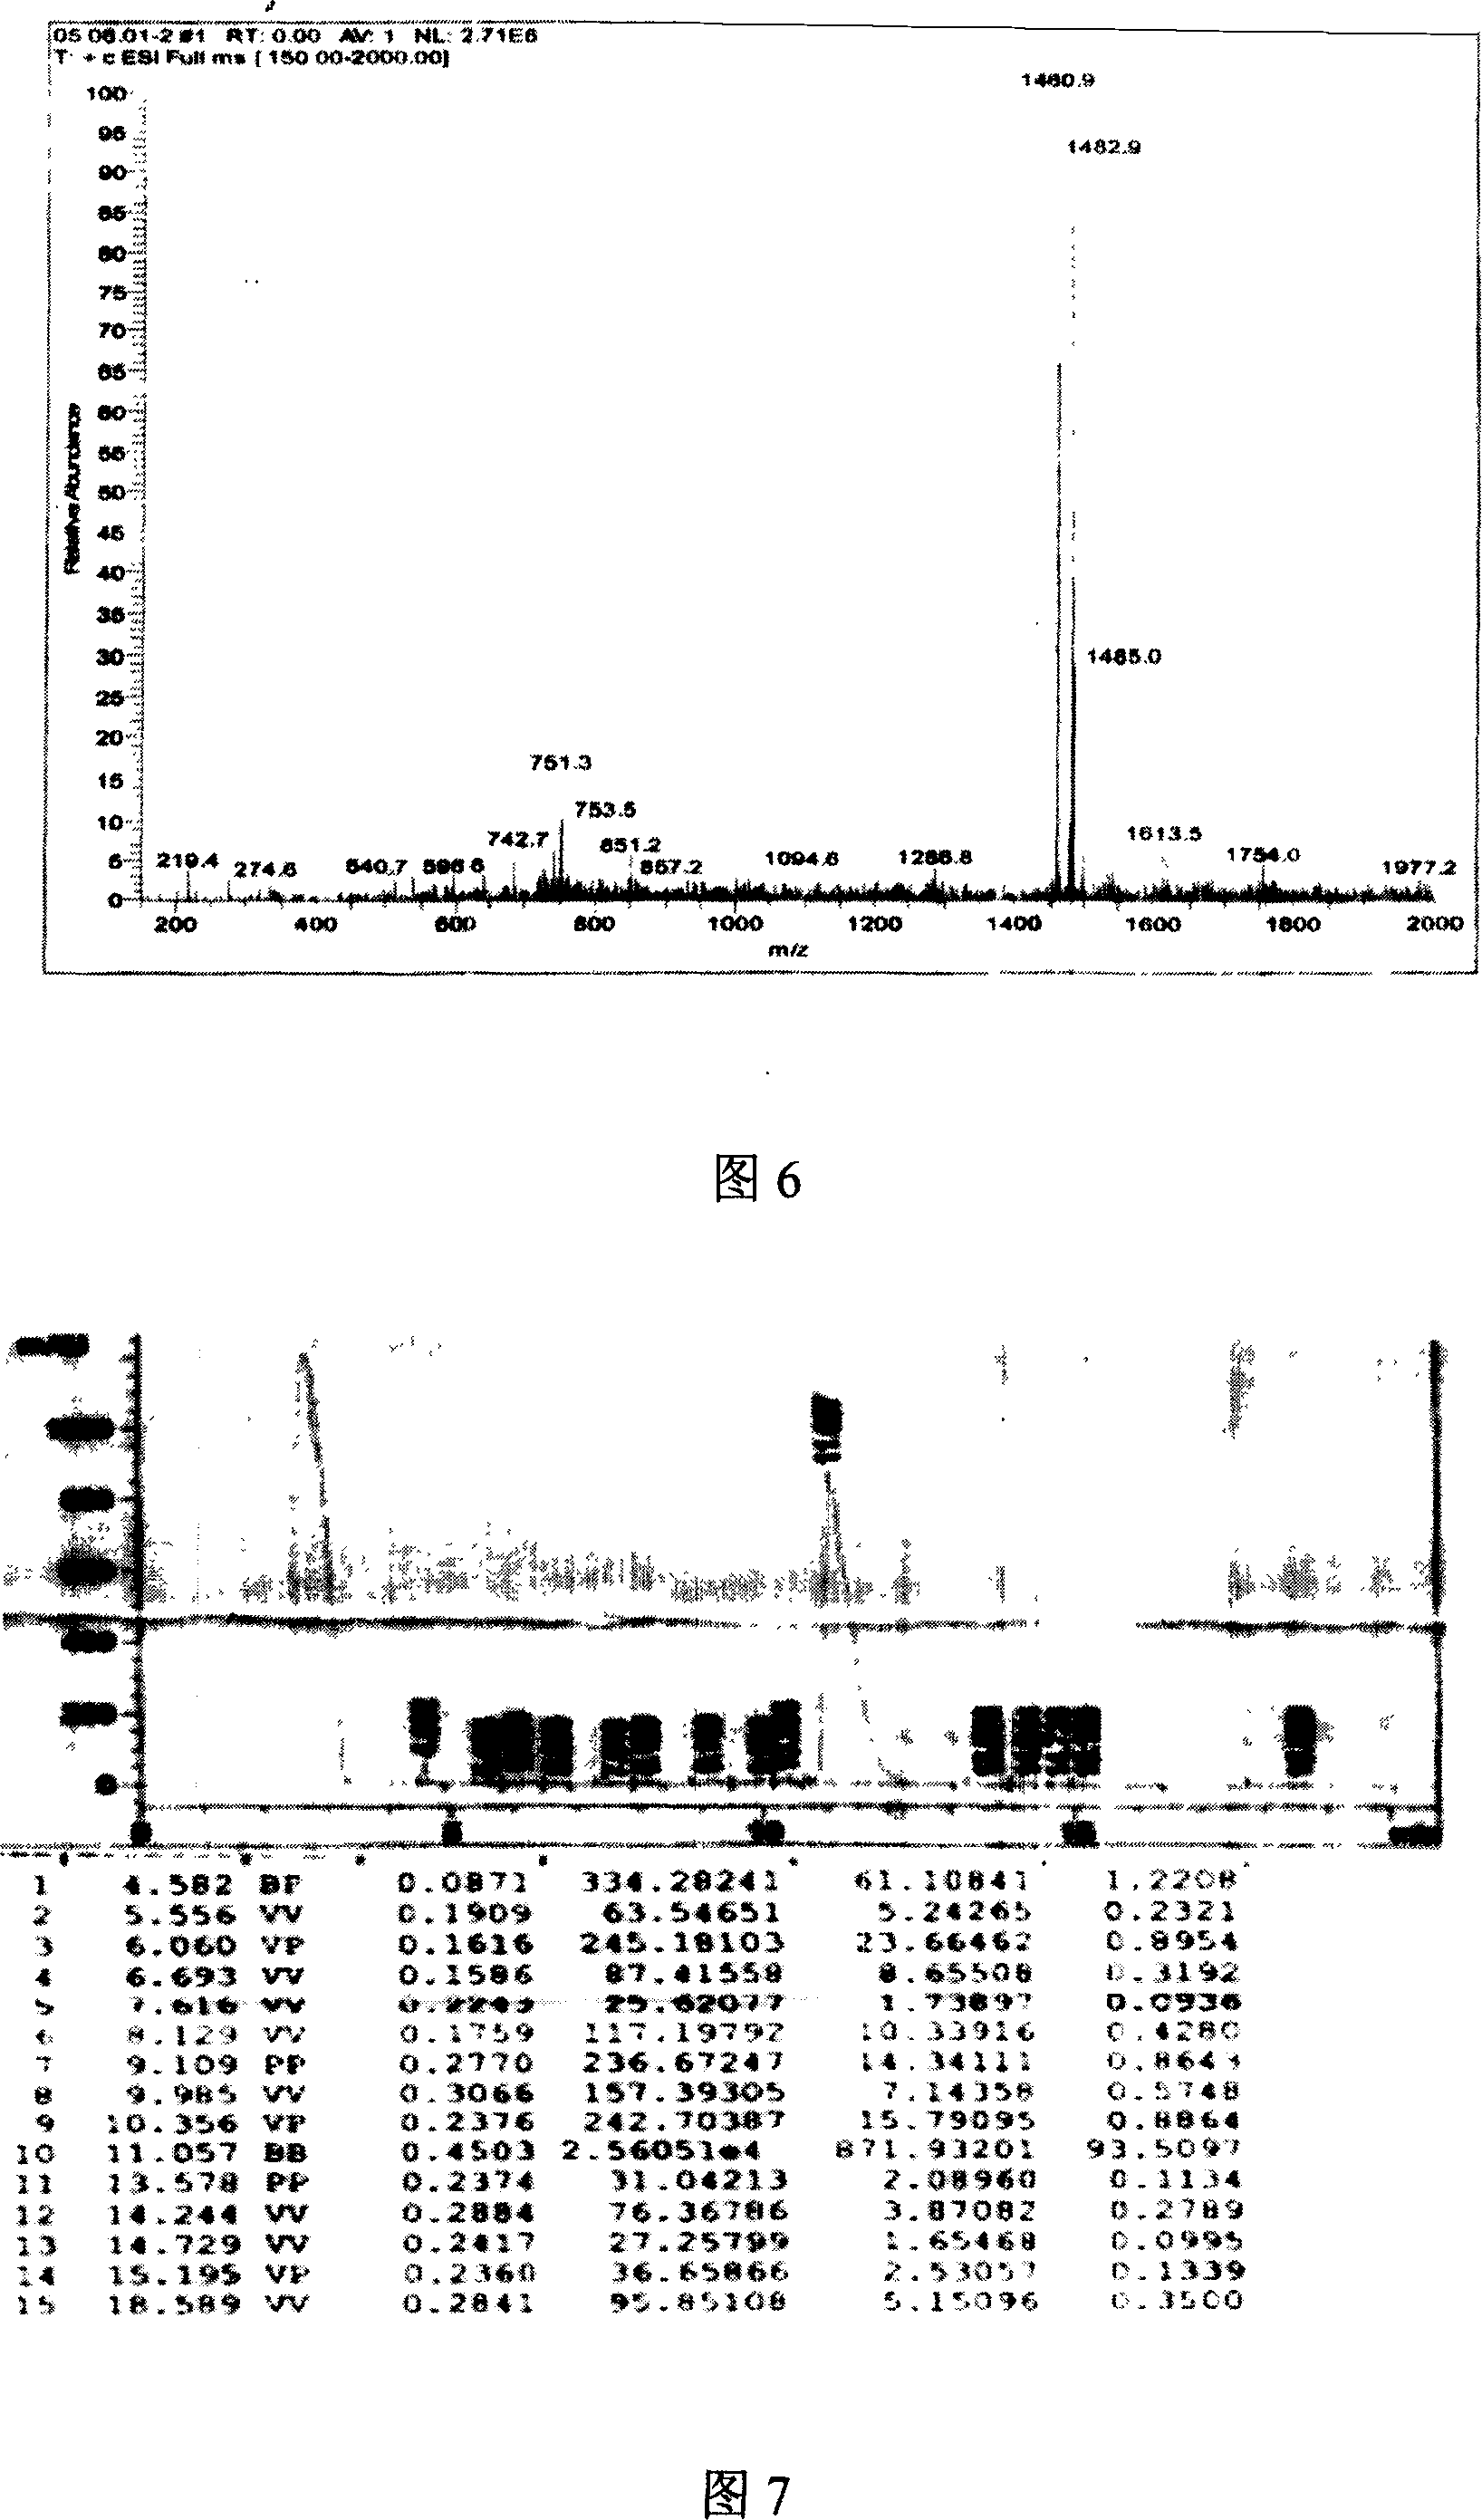 Short peptide for inhibiting Shiga toxin and application thereof